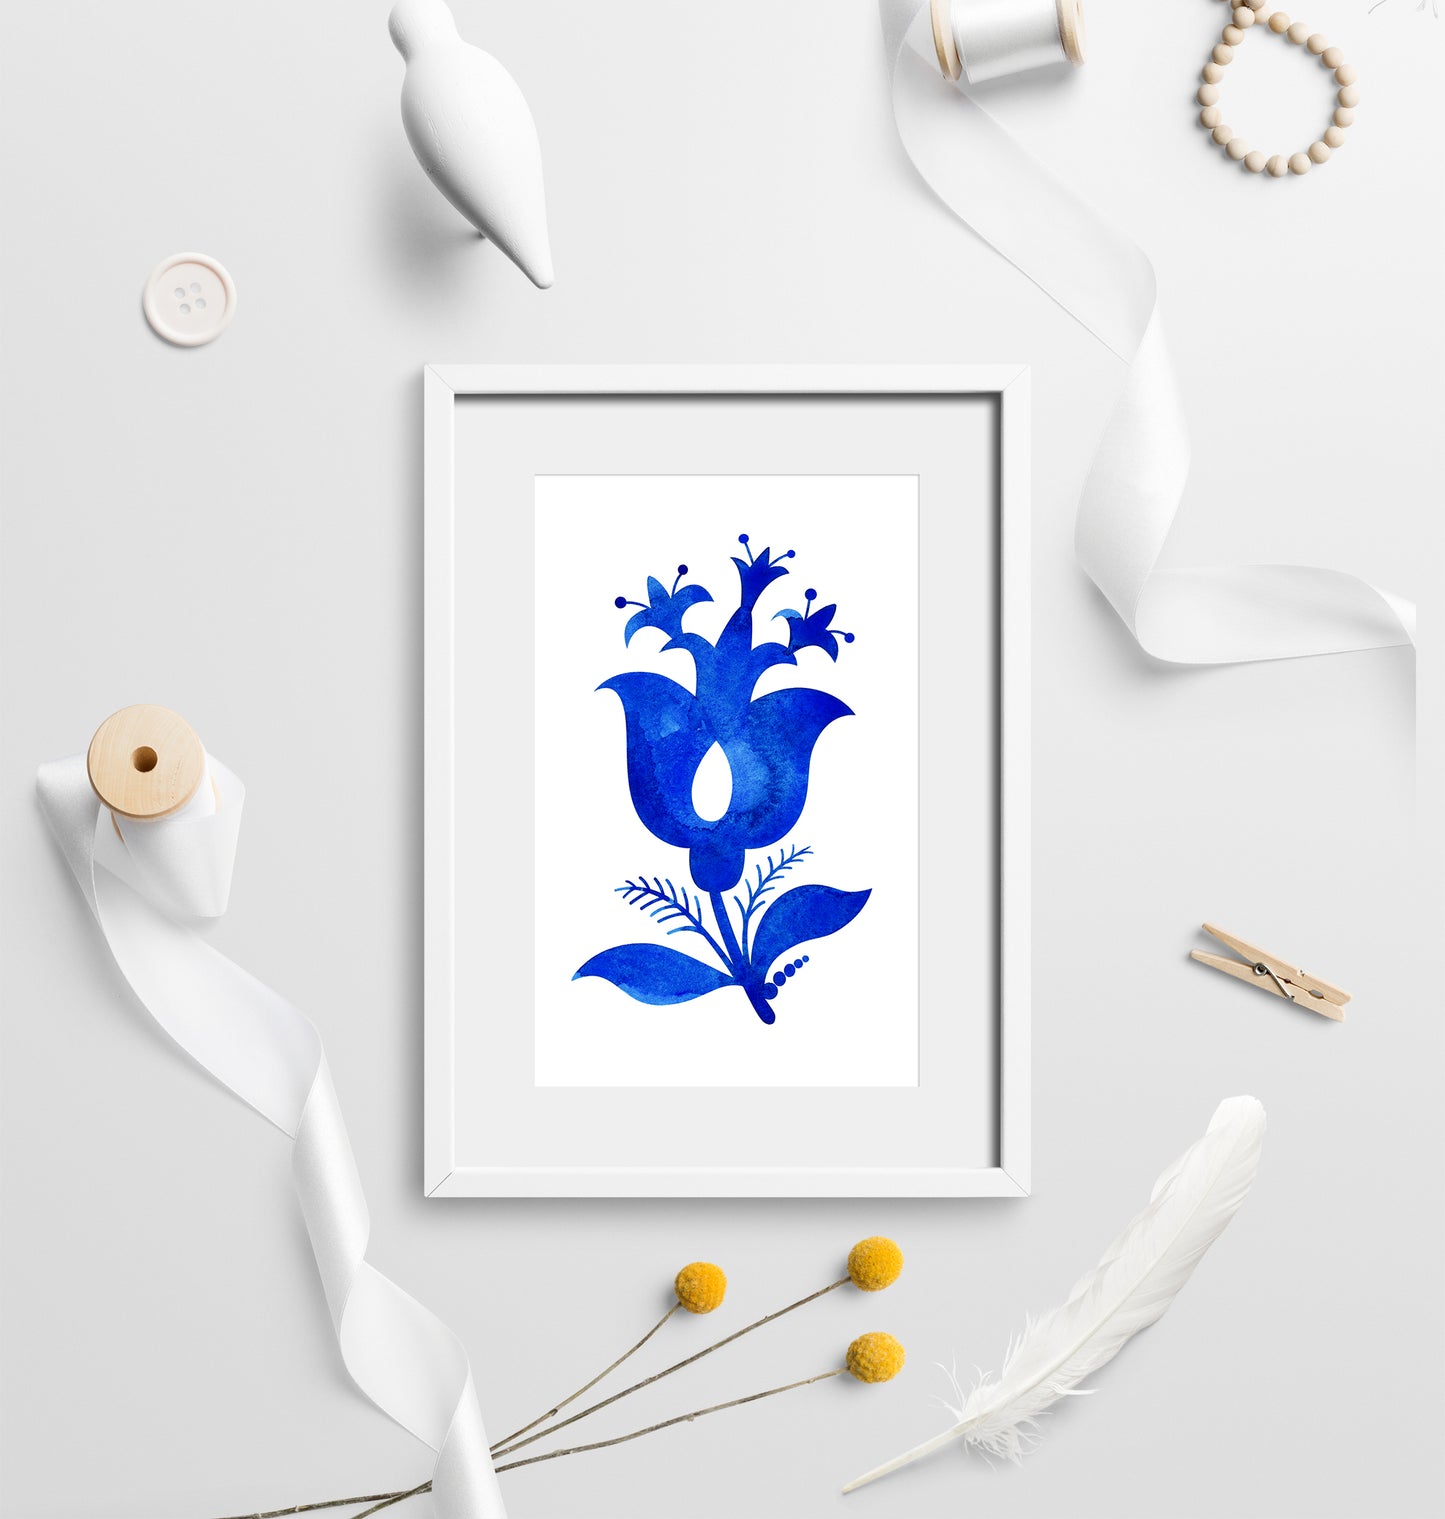 BLUE DELFT Graphic Collection